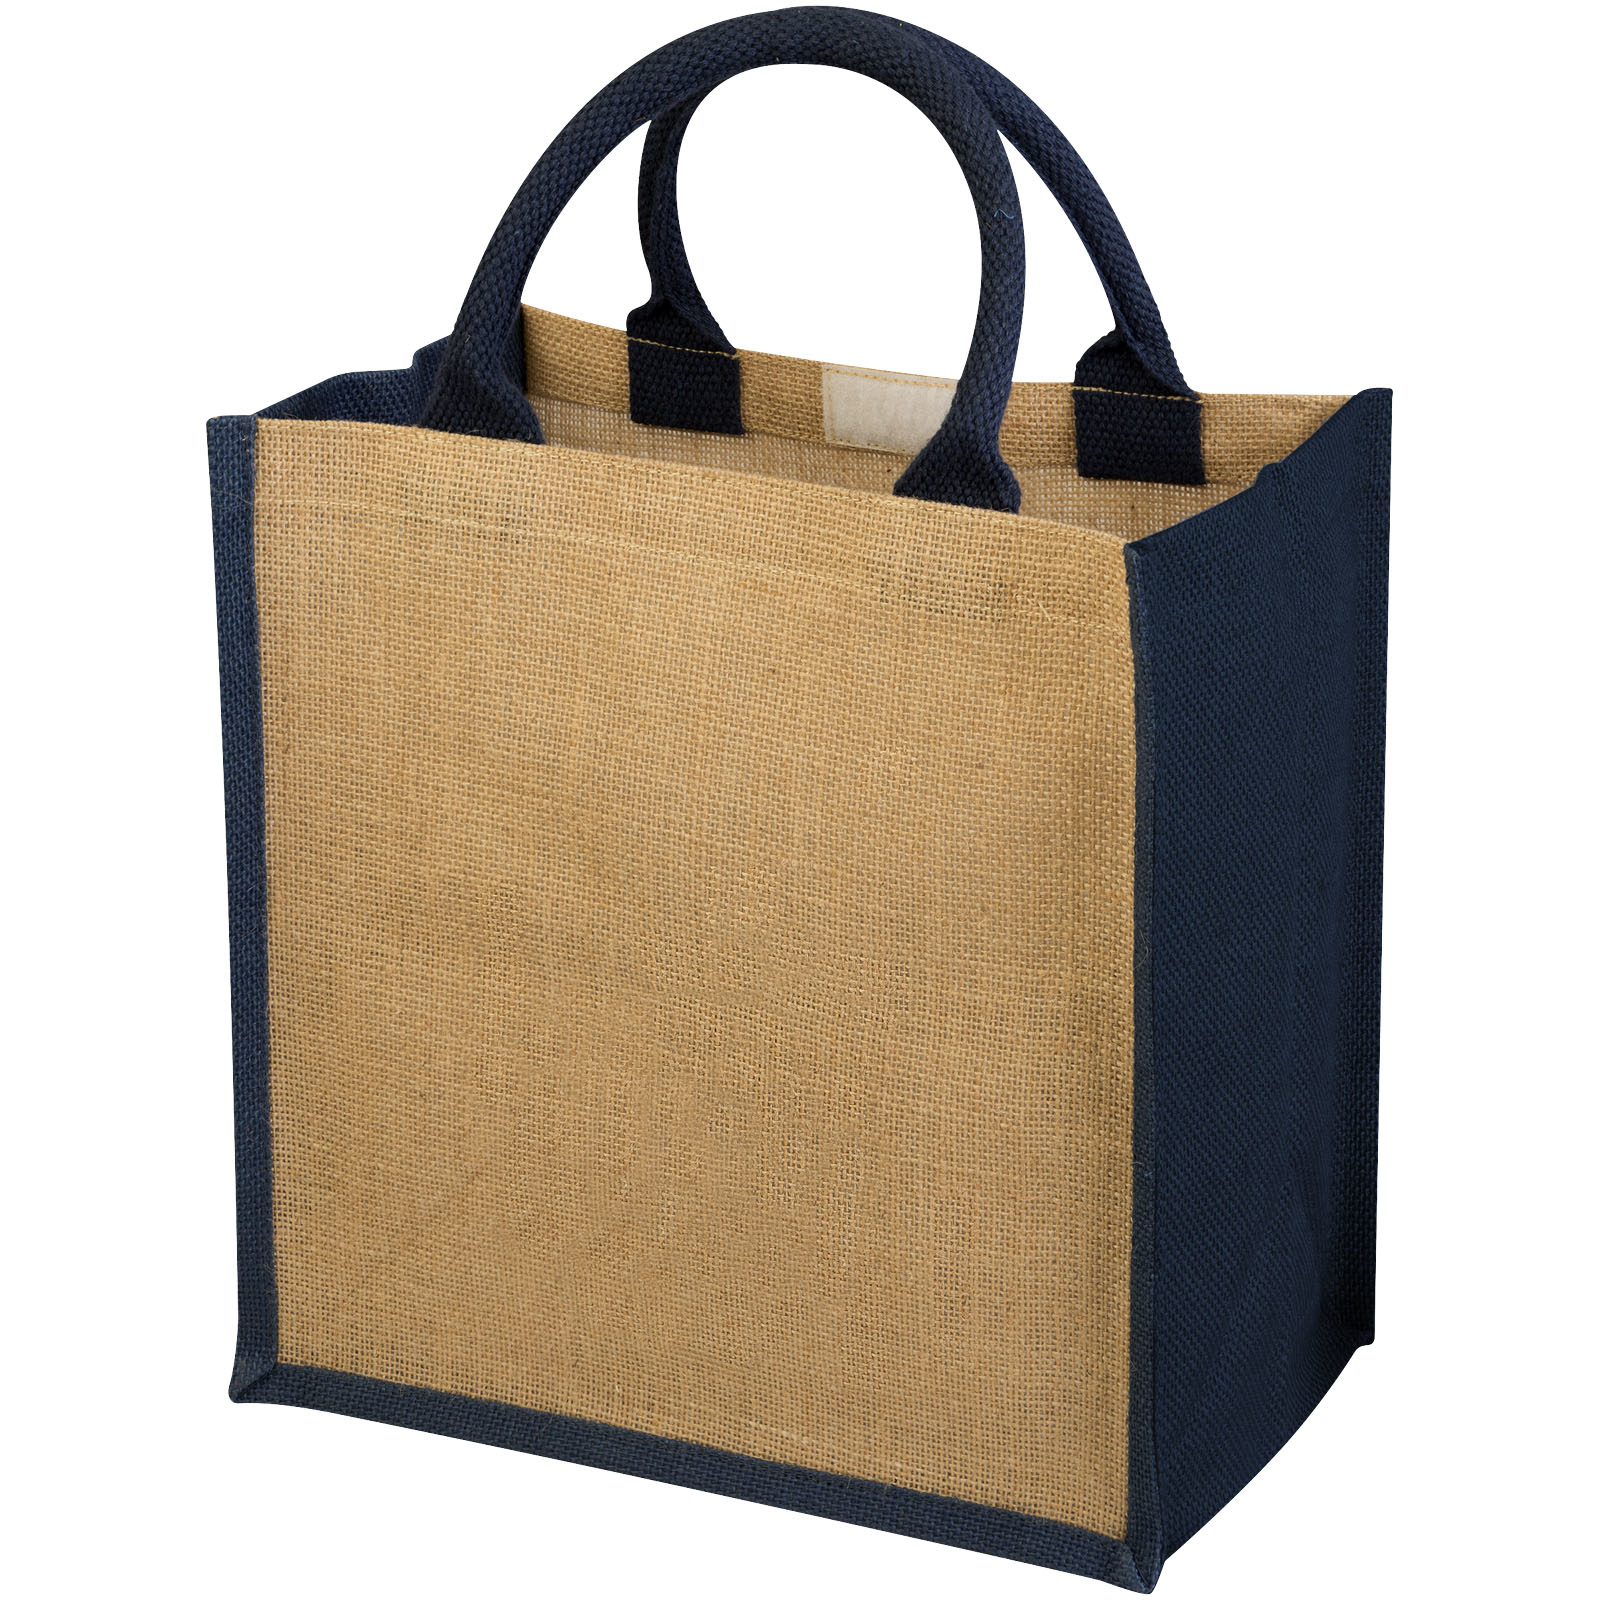 An image of a jute shopper with a blue gusset